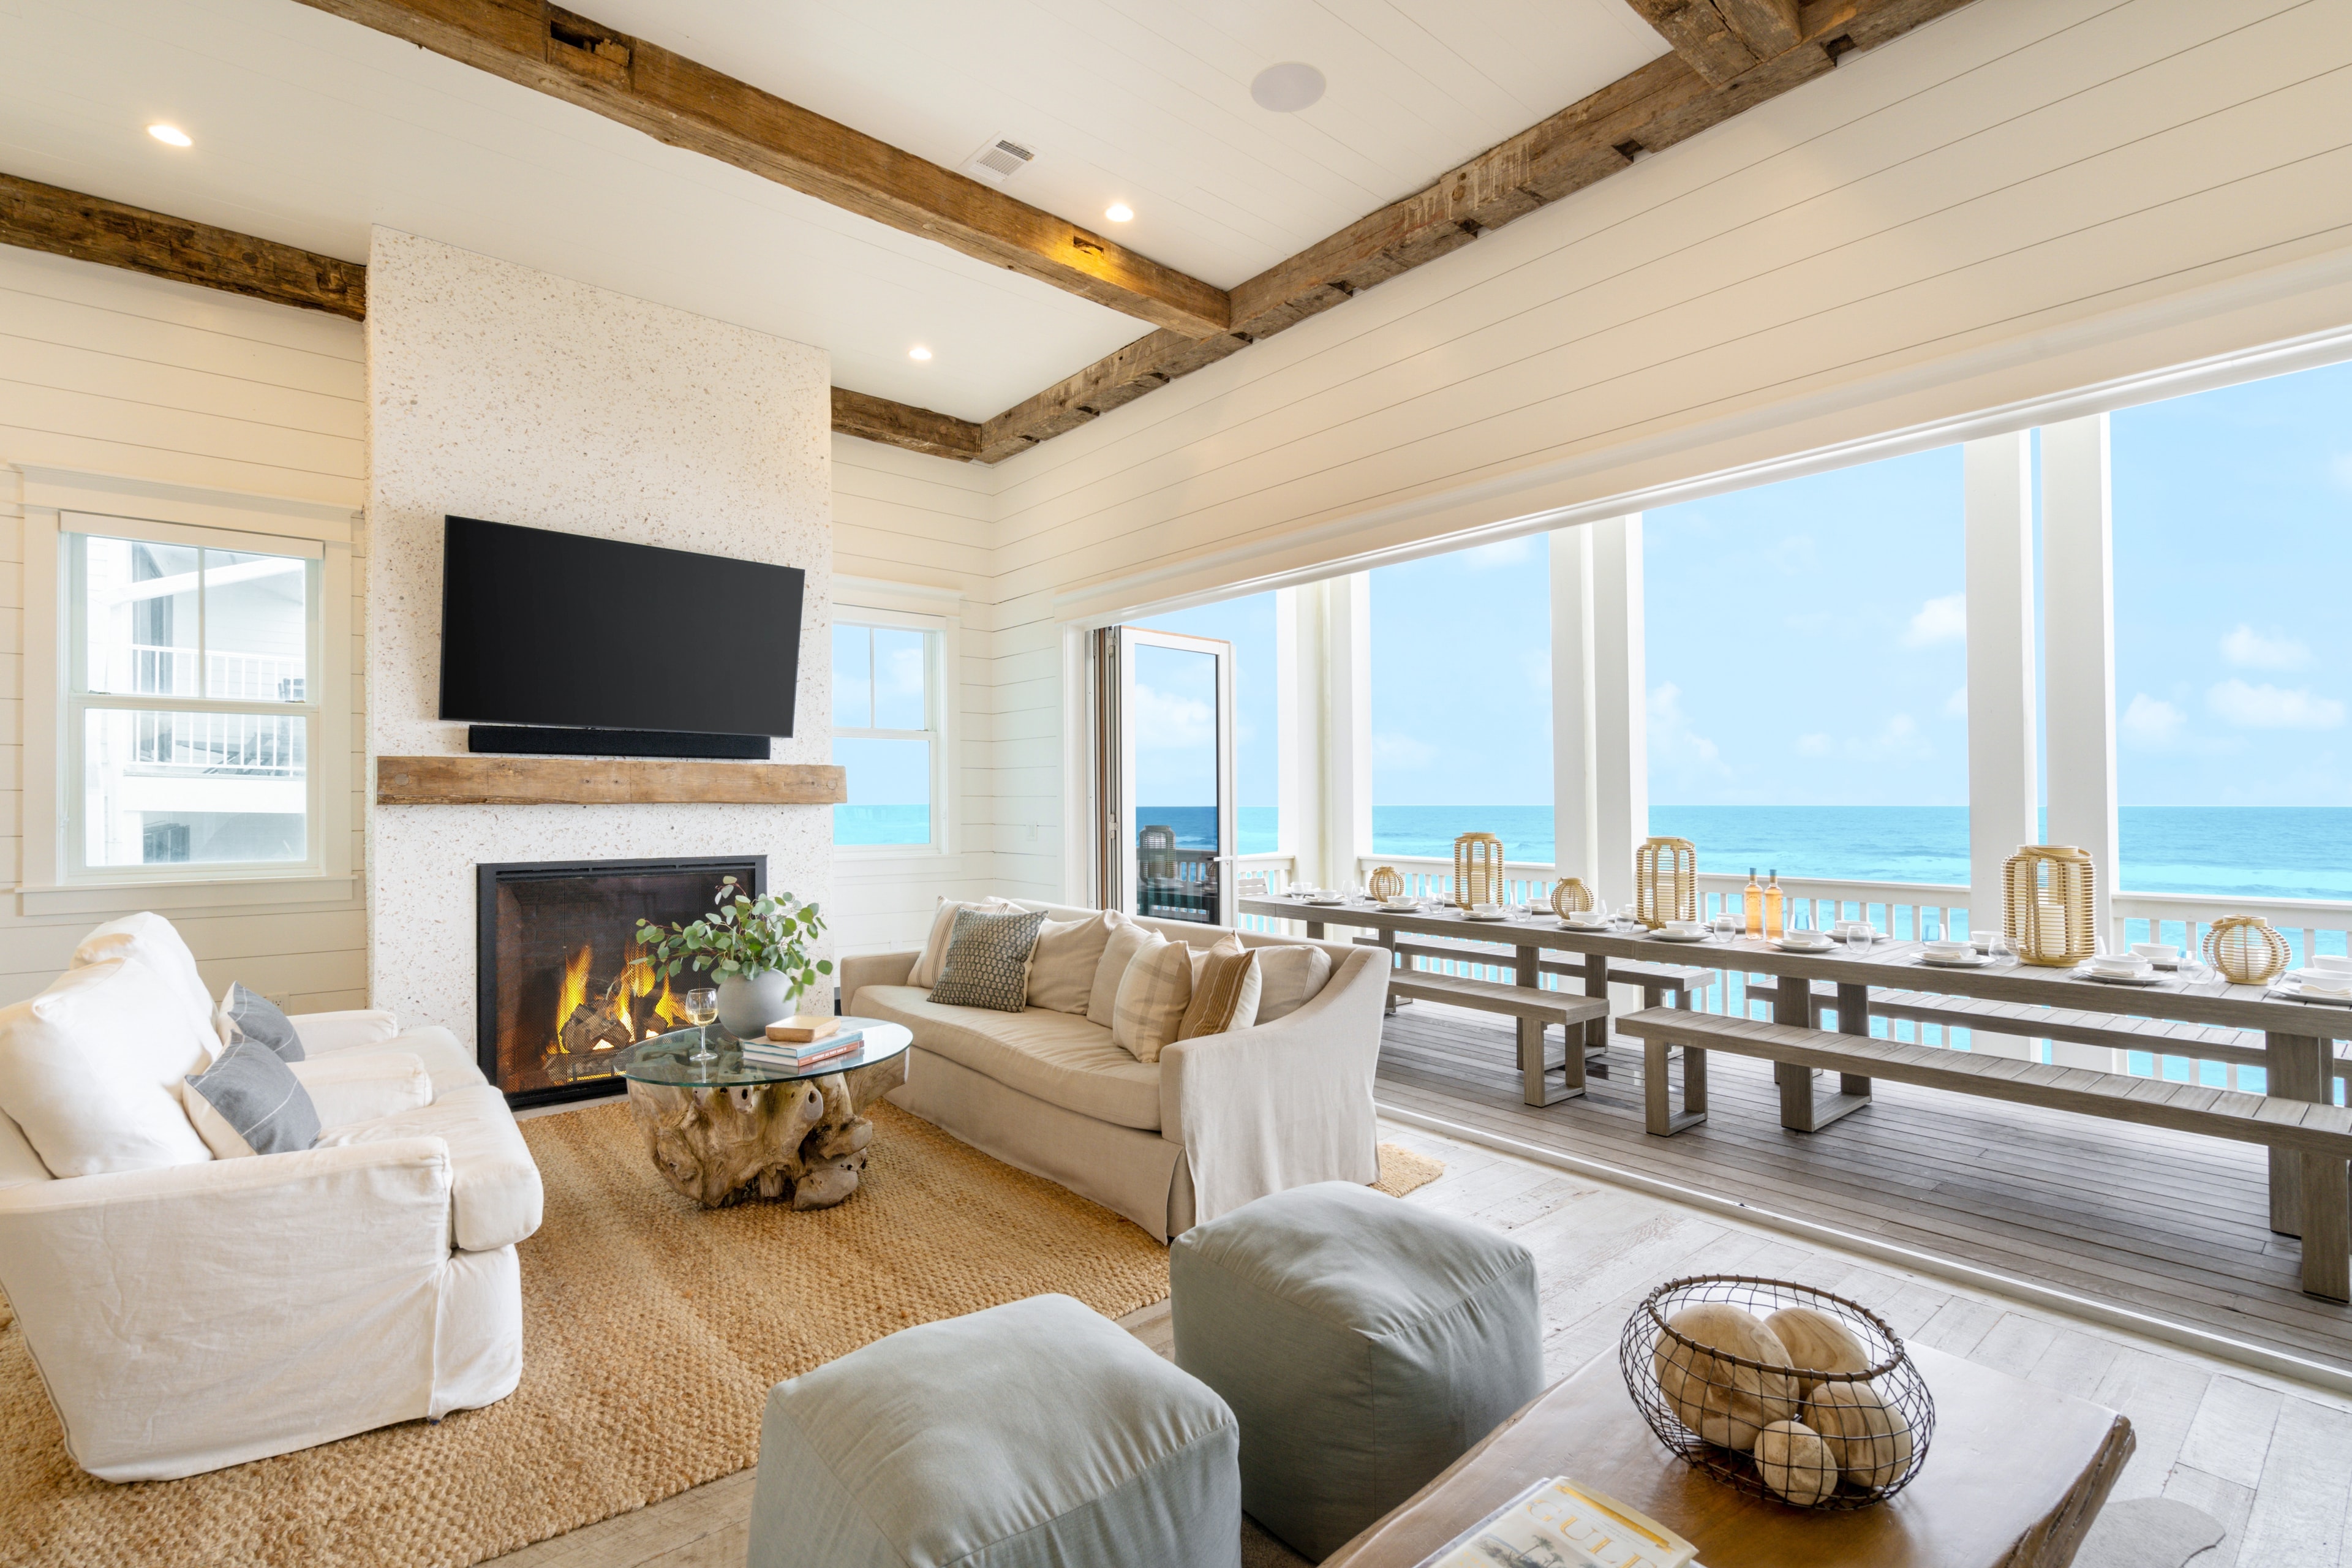 Large doors bring in the views and fresh ocean air for prime indoor/outdoor living.